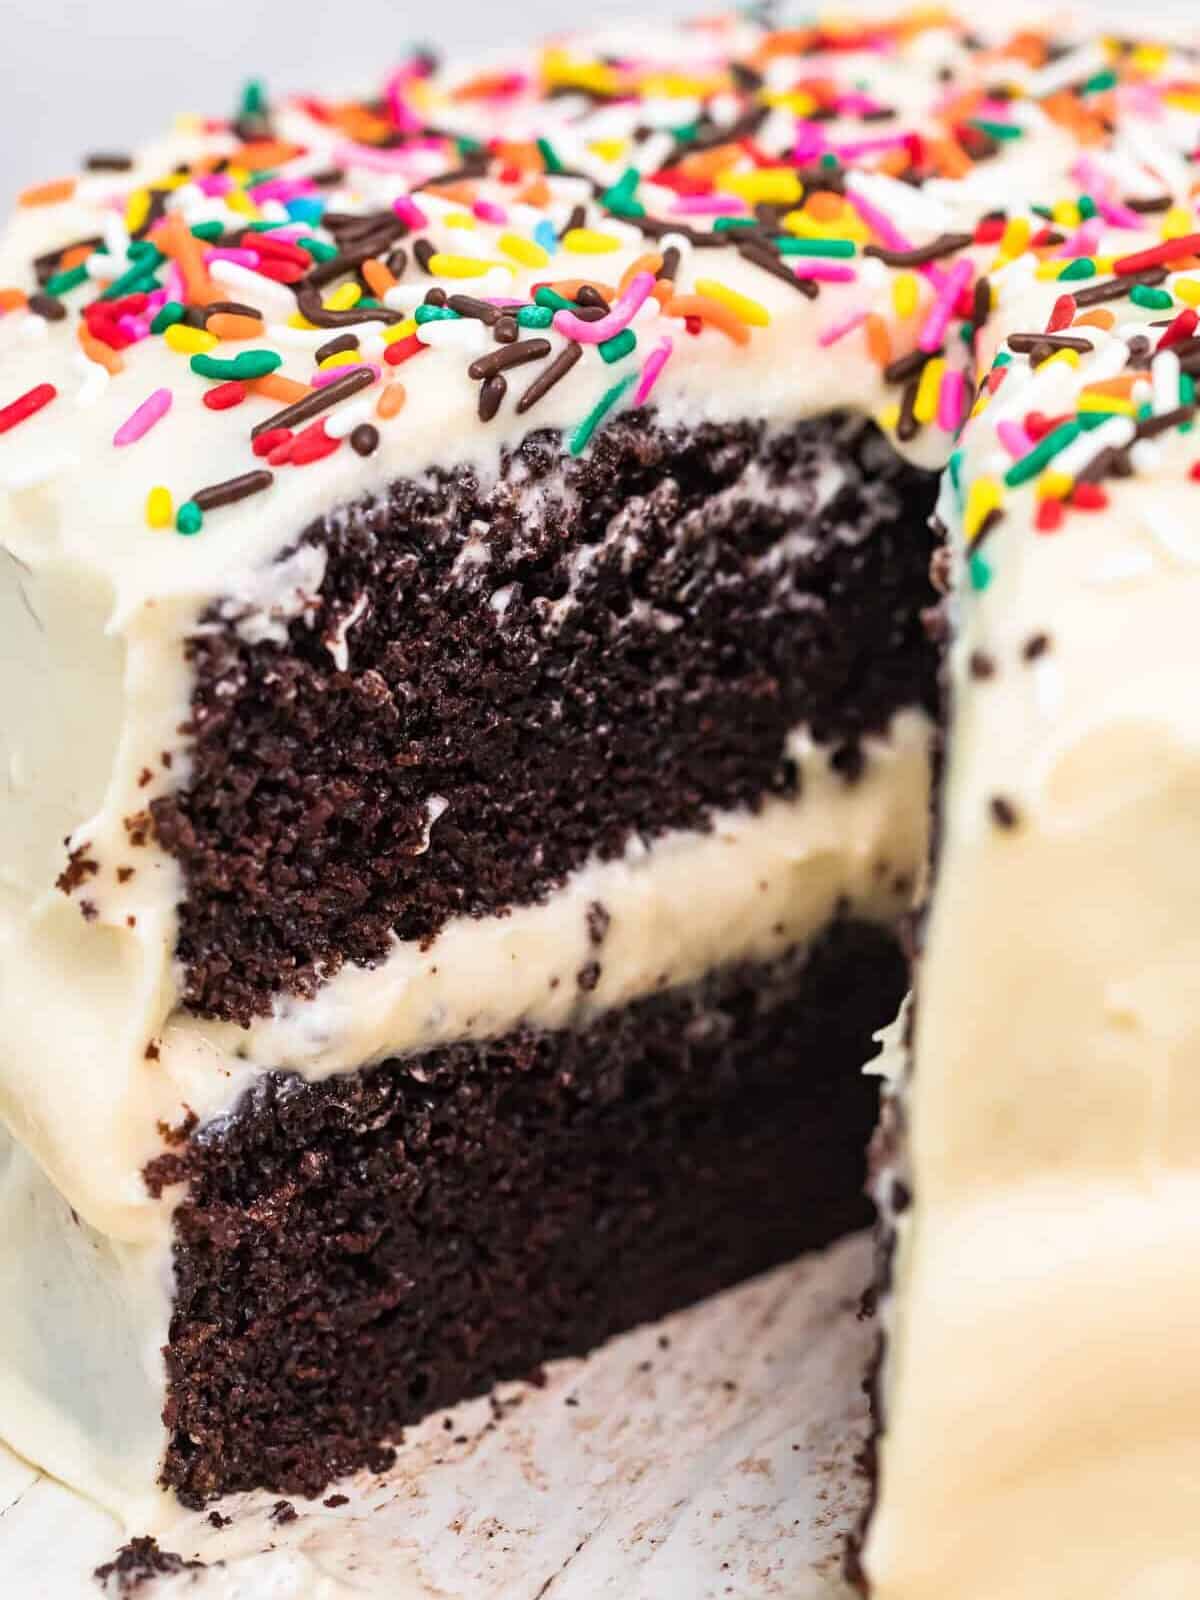 up close image of hershey chocolate cake with white icing